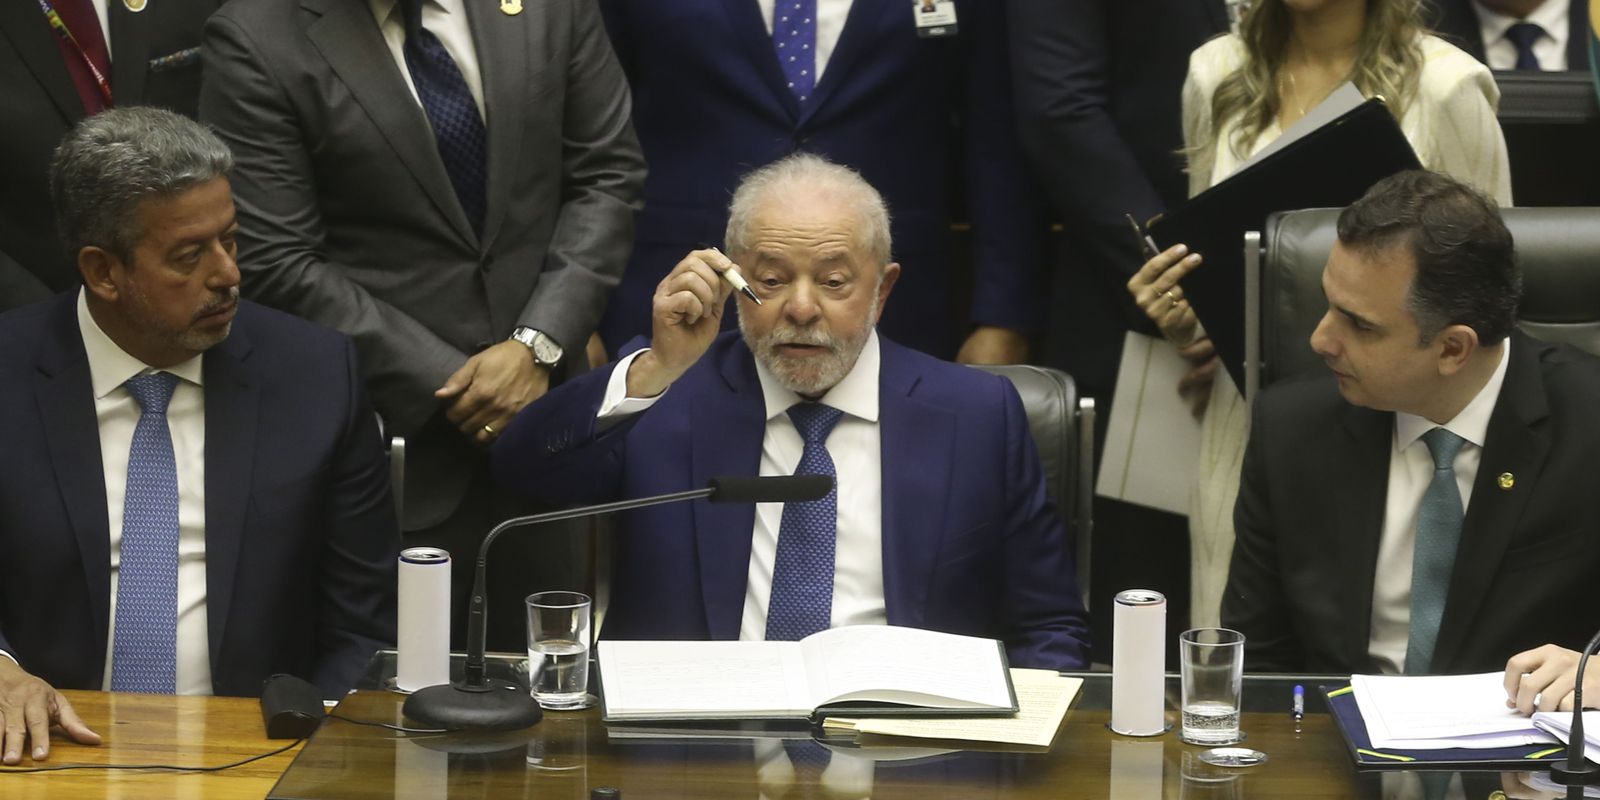 Inauguration book and presidential sash that Lula wore are official